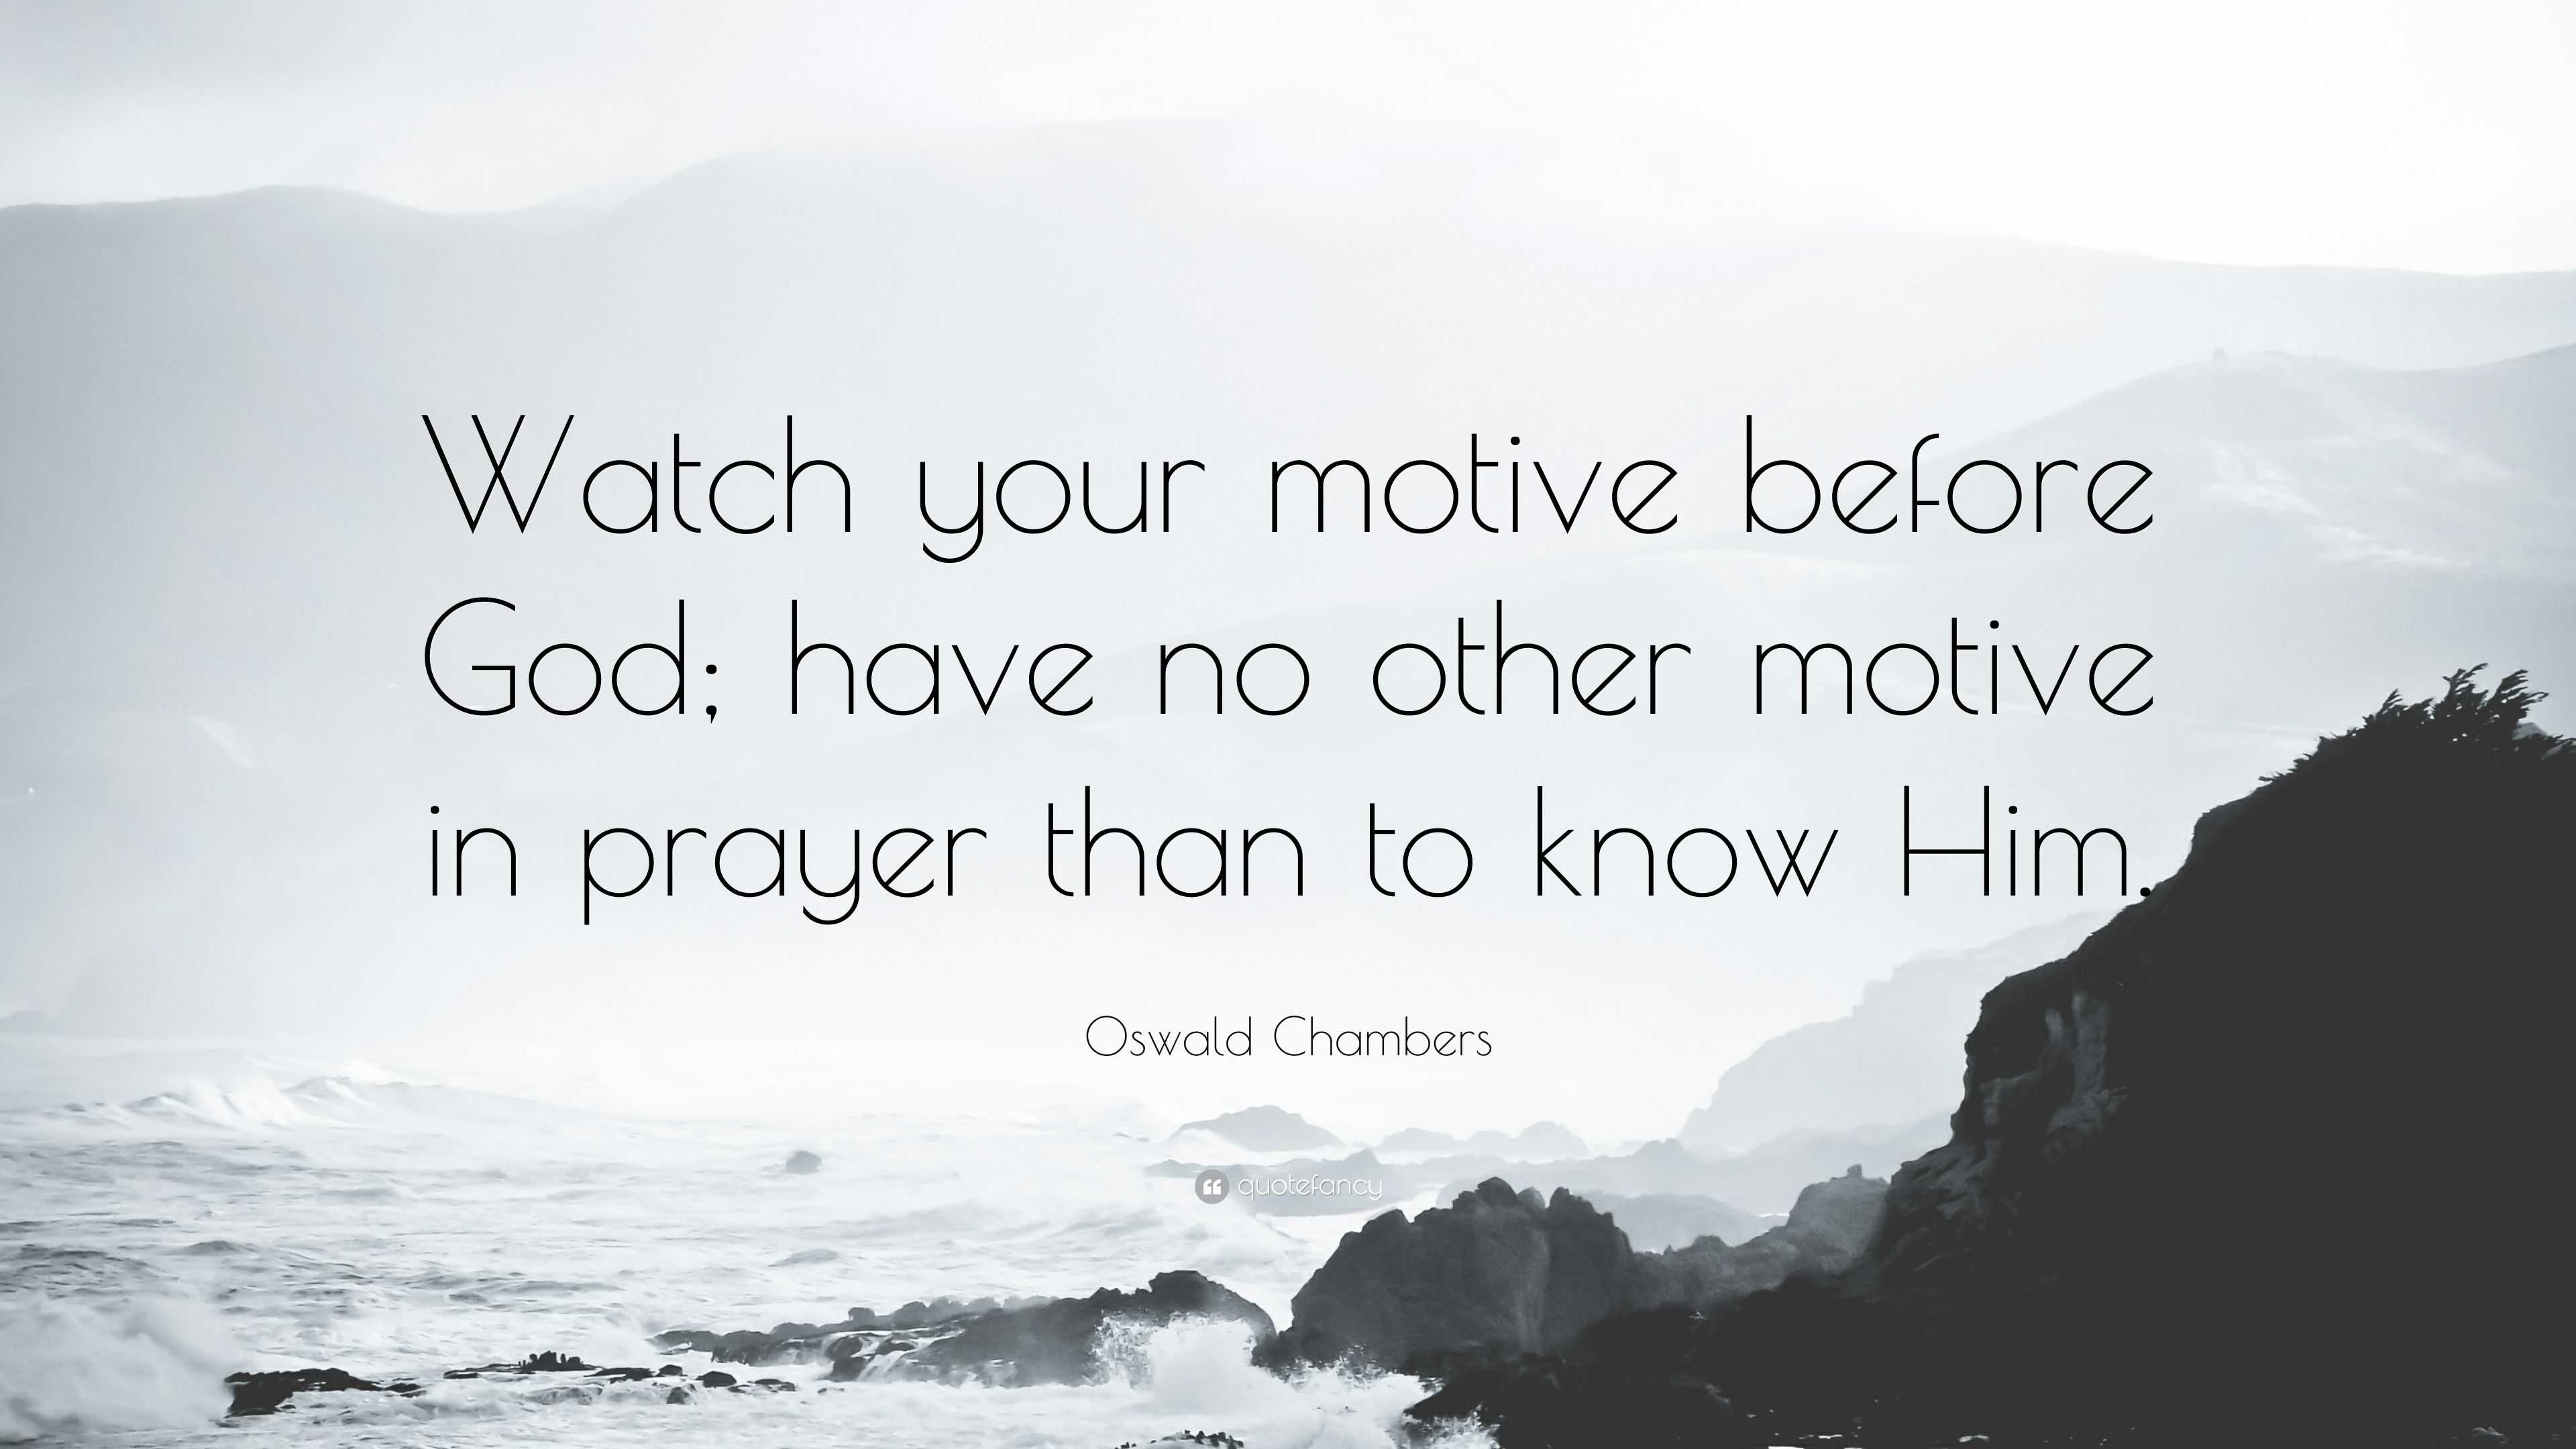 Oswald Chambers Quote: “Watch your motive before God; have no other